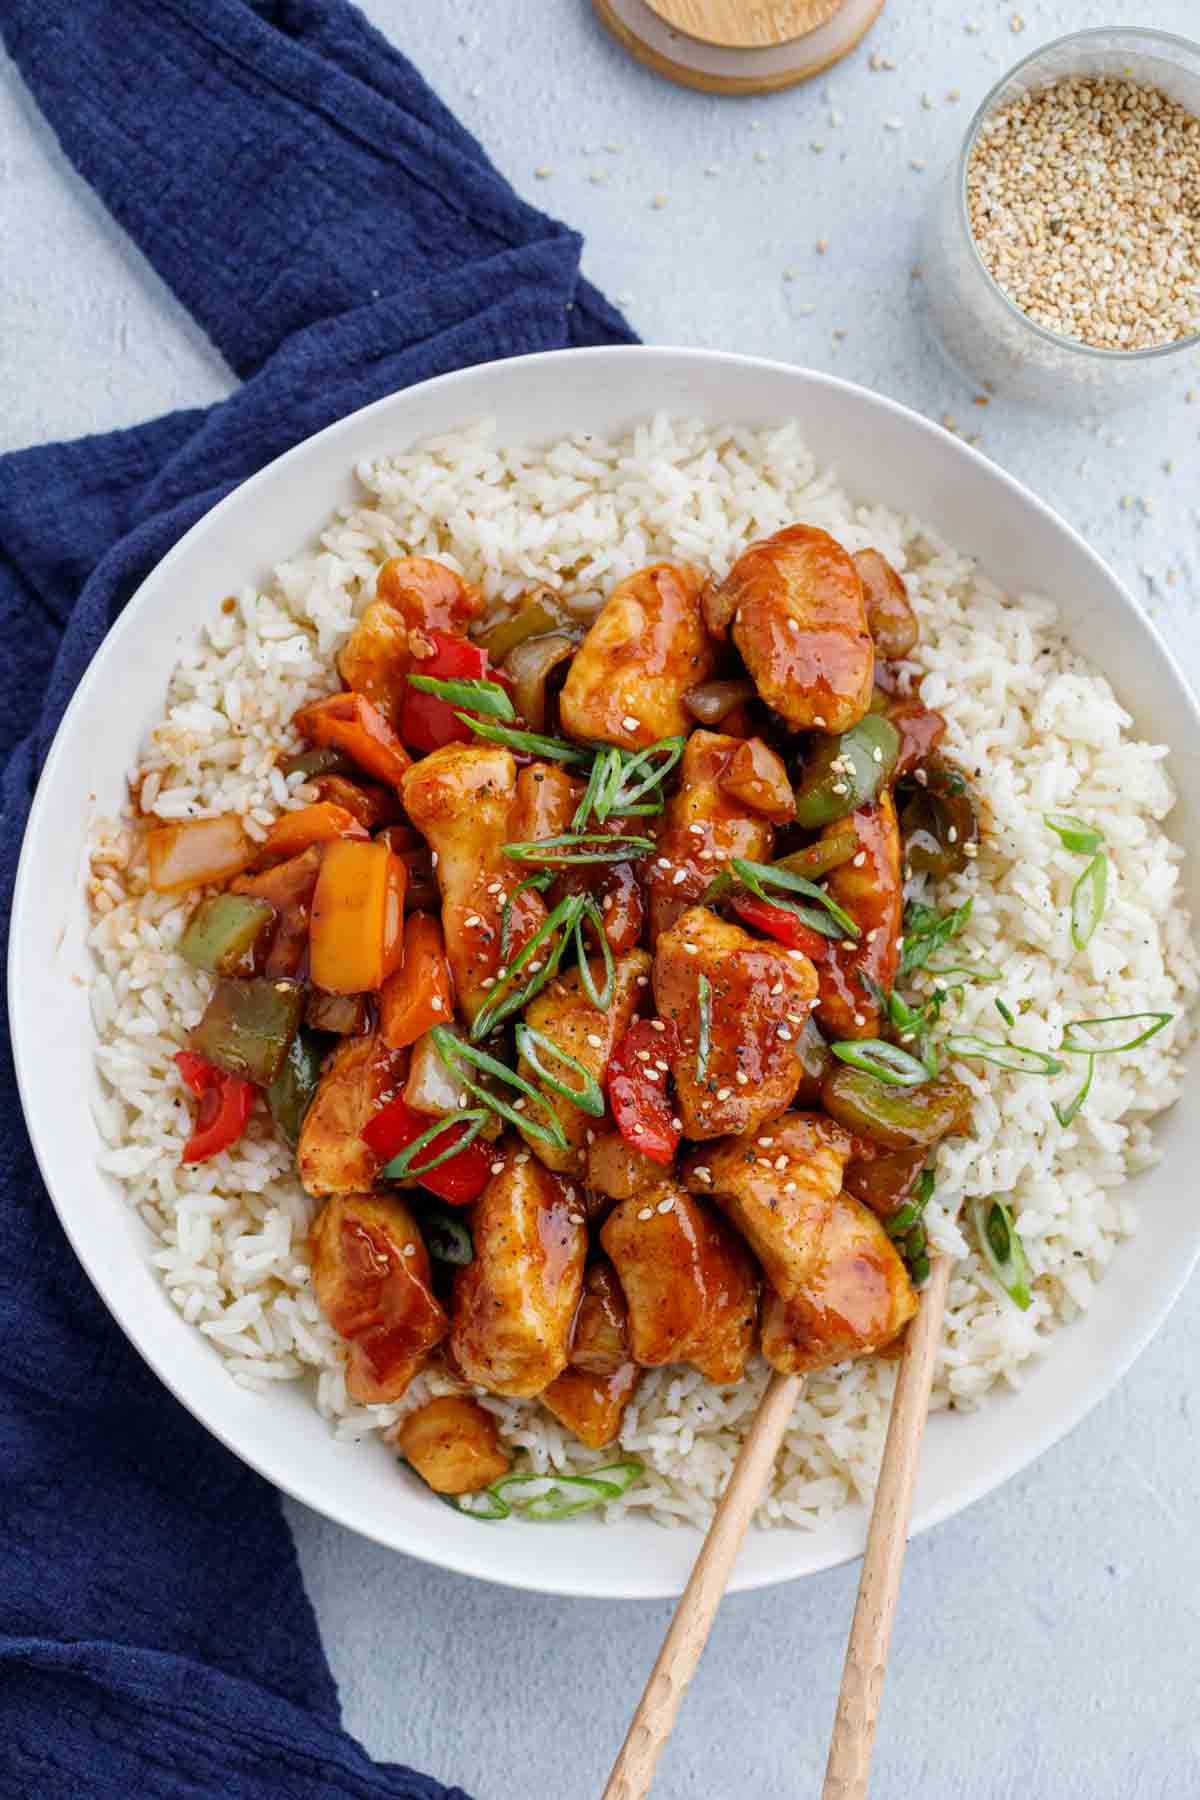 Sweet and sour chicken recipe topped on top of rice in serving plate.